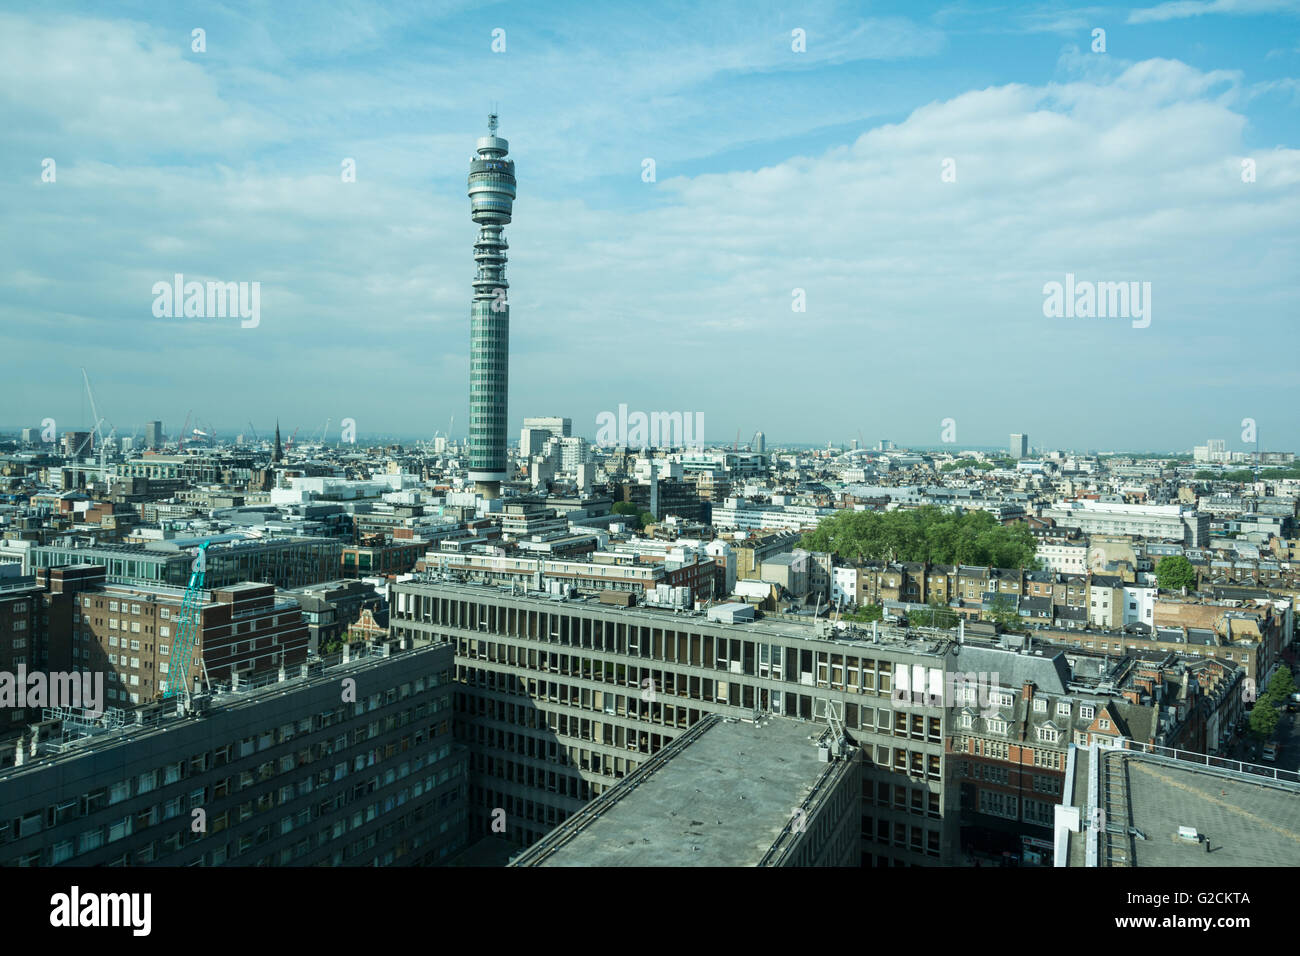 The BT Tower, Fitzrovia, Londres, Angleterre, Royaume-Uni Banque D'Images